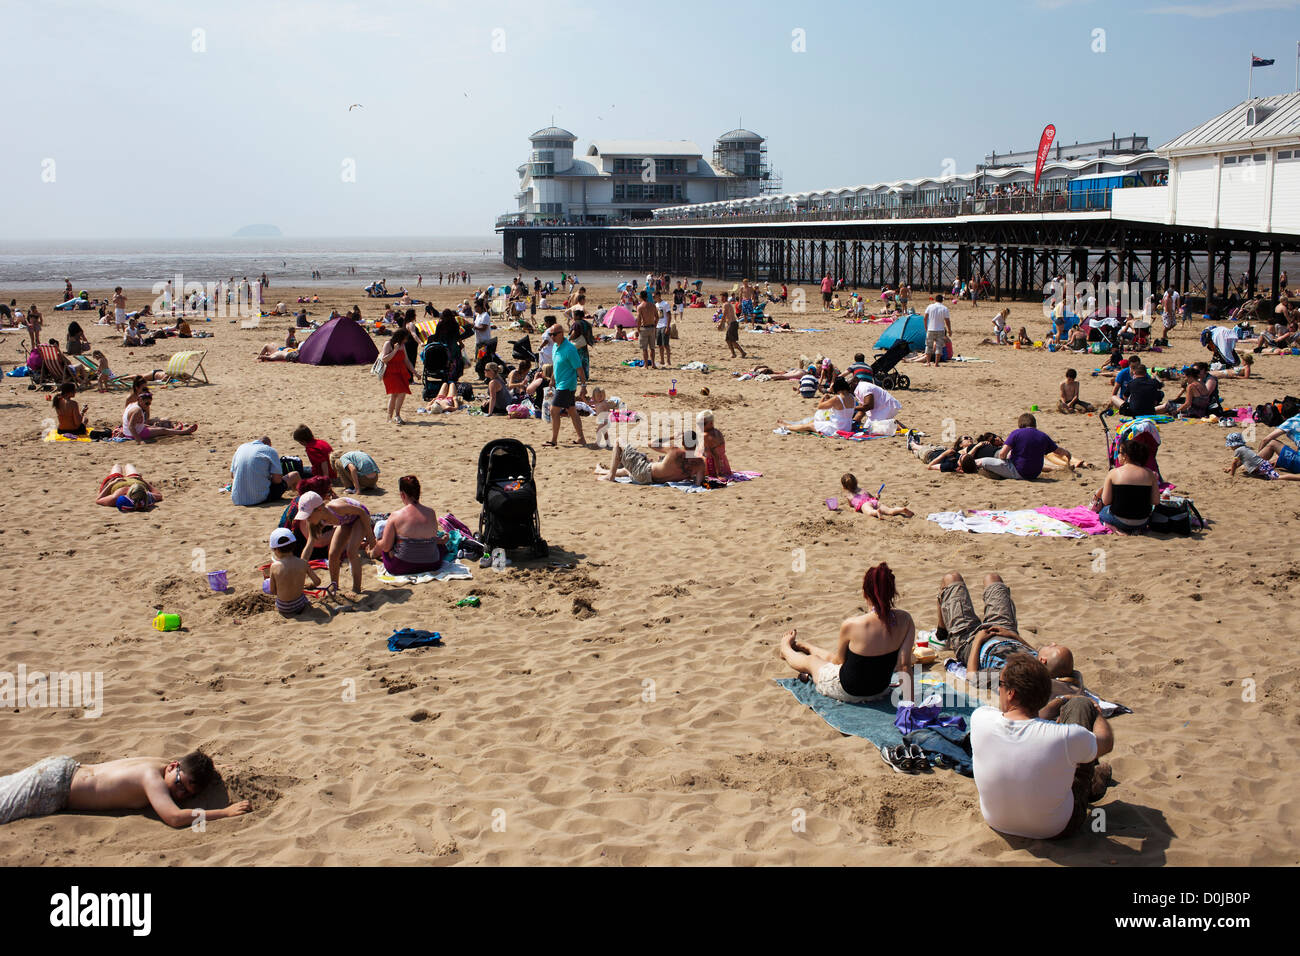 A packed beach at Weston Super Mare. Stock Photo